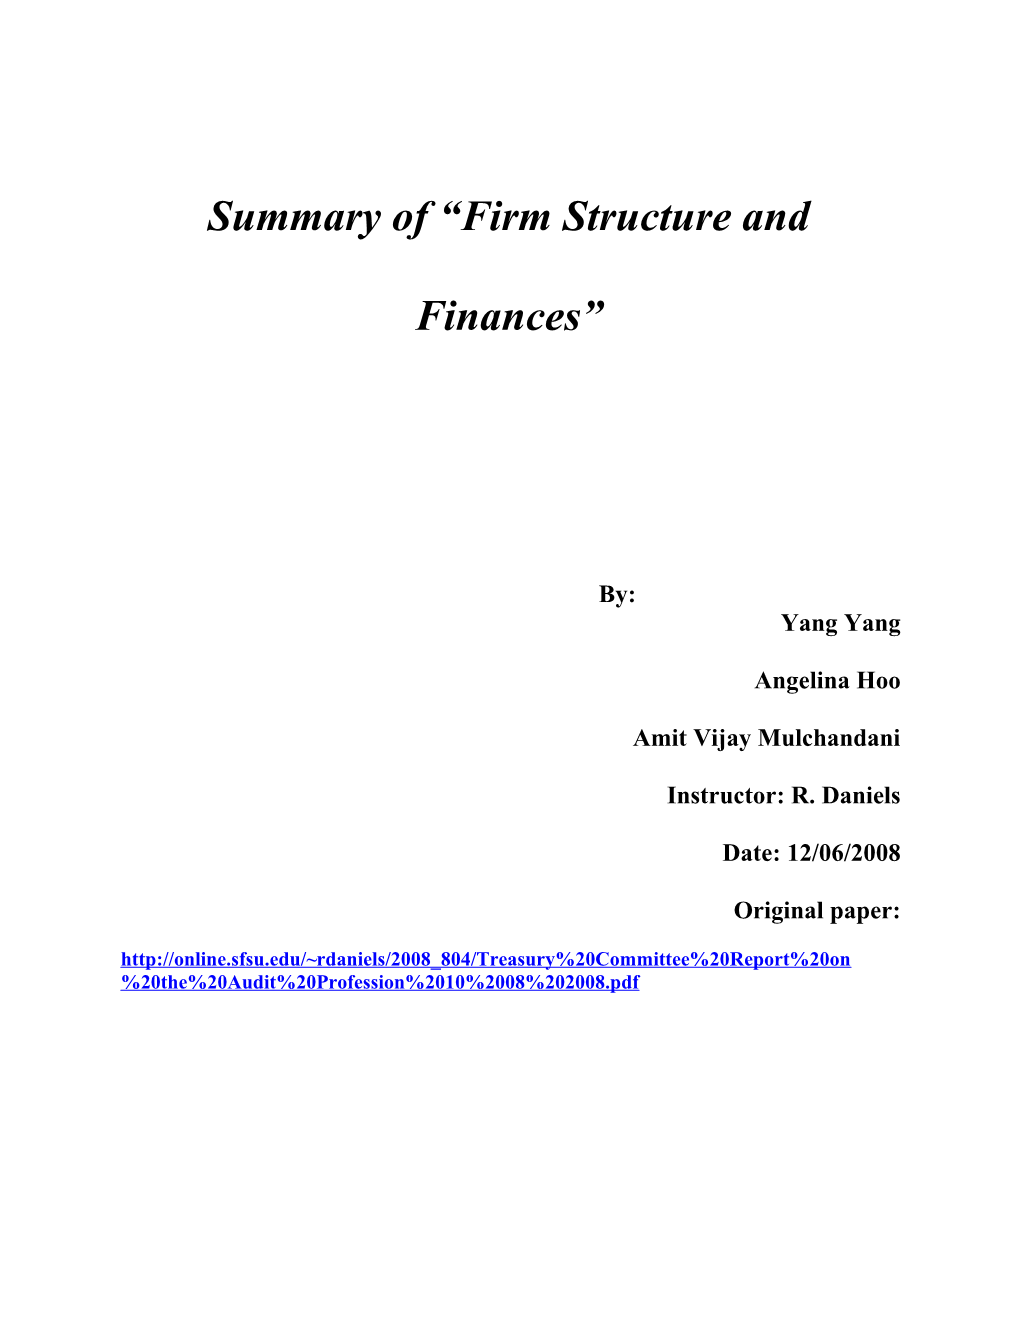 Summary of Firm Structure and Finances